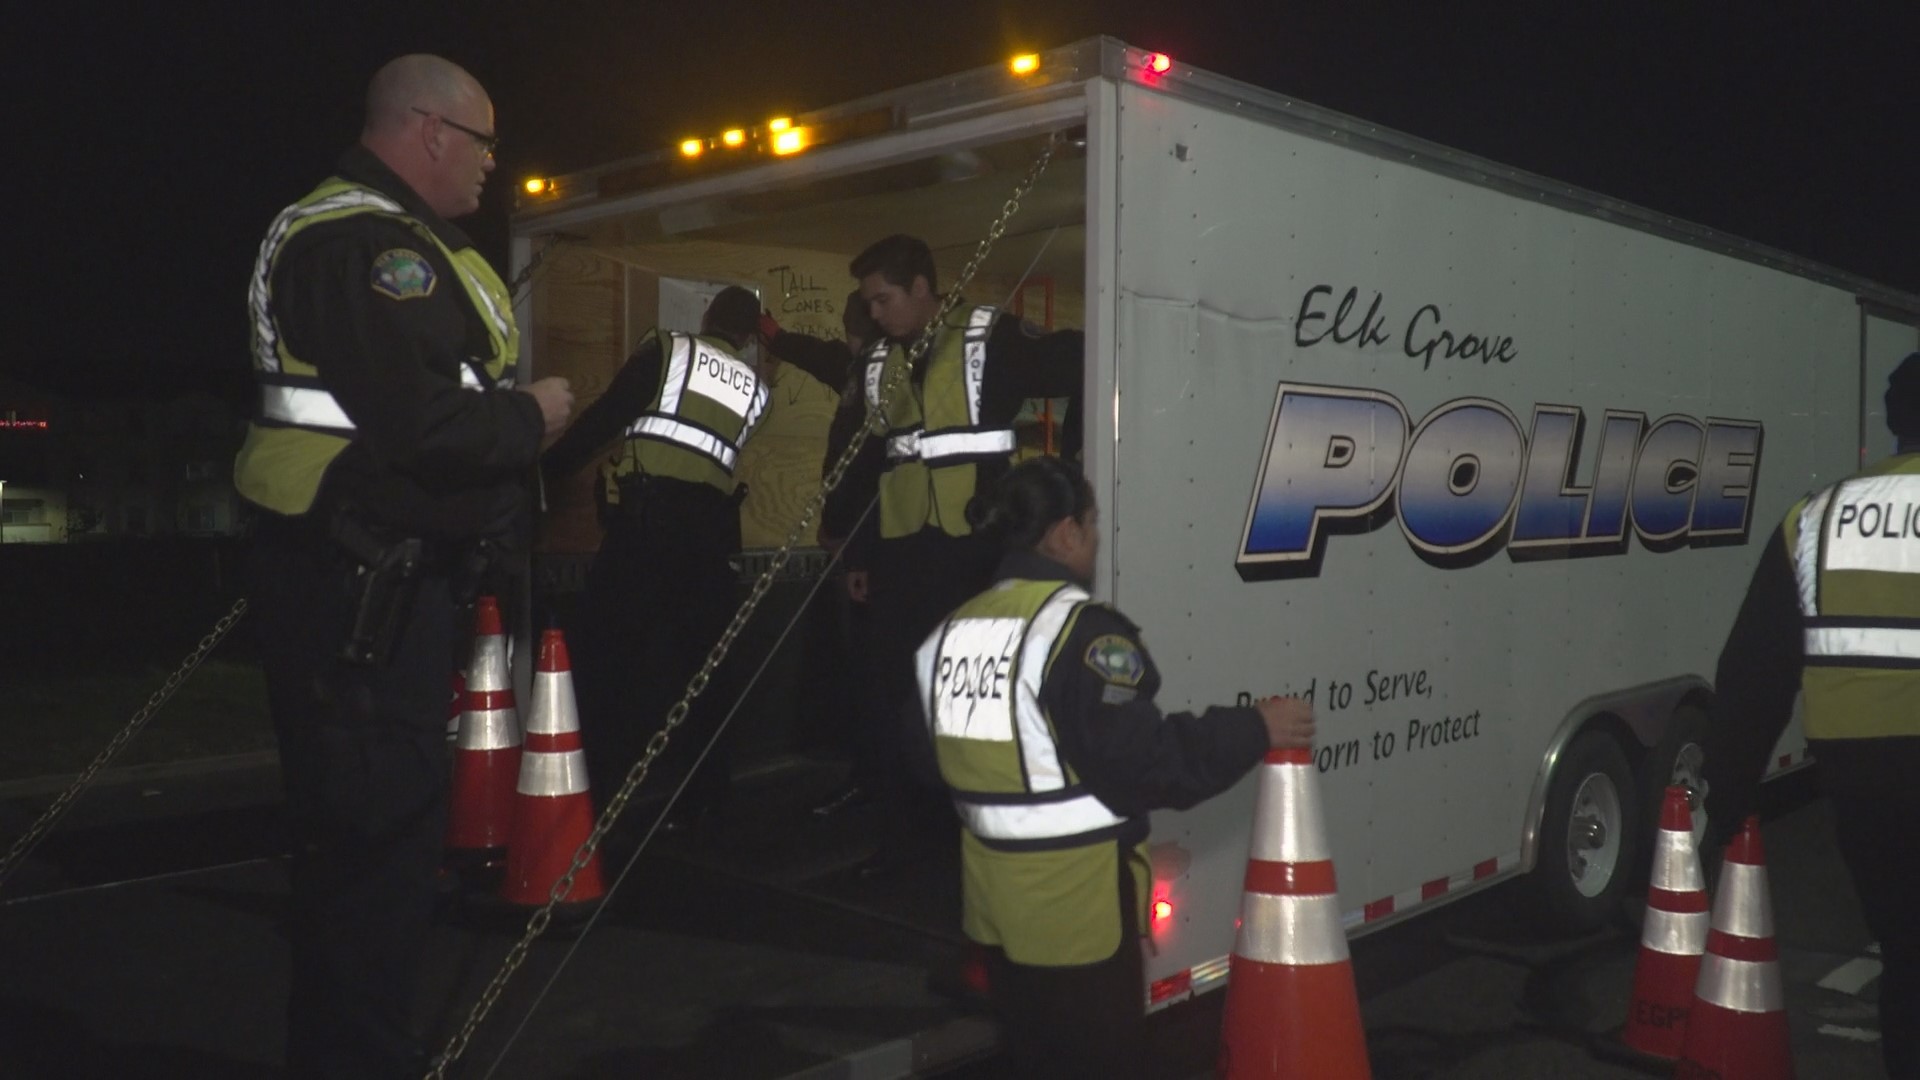 Elk Grove police launched a major DUI check point operation on one of the city's busiest thoroughfares Friday night.